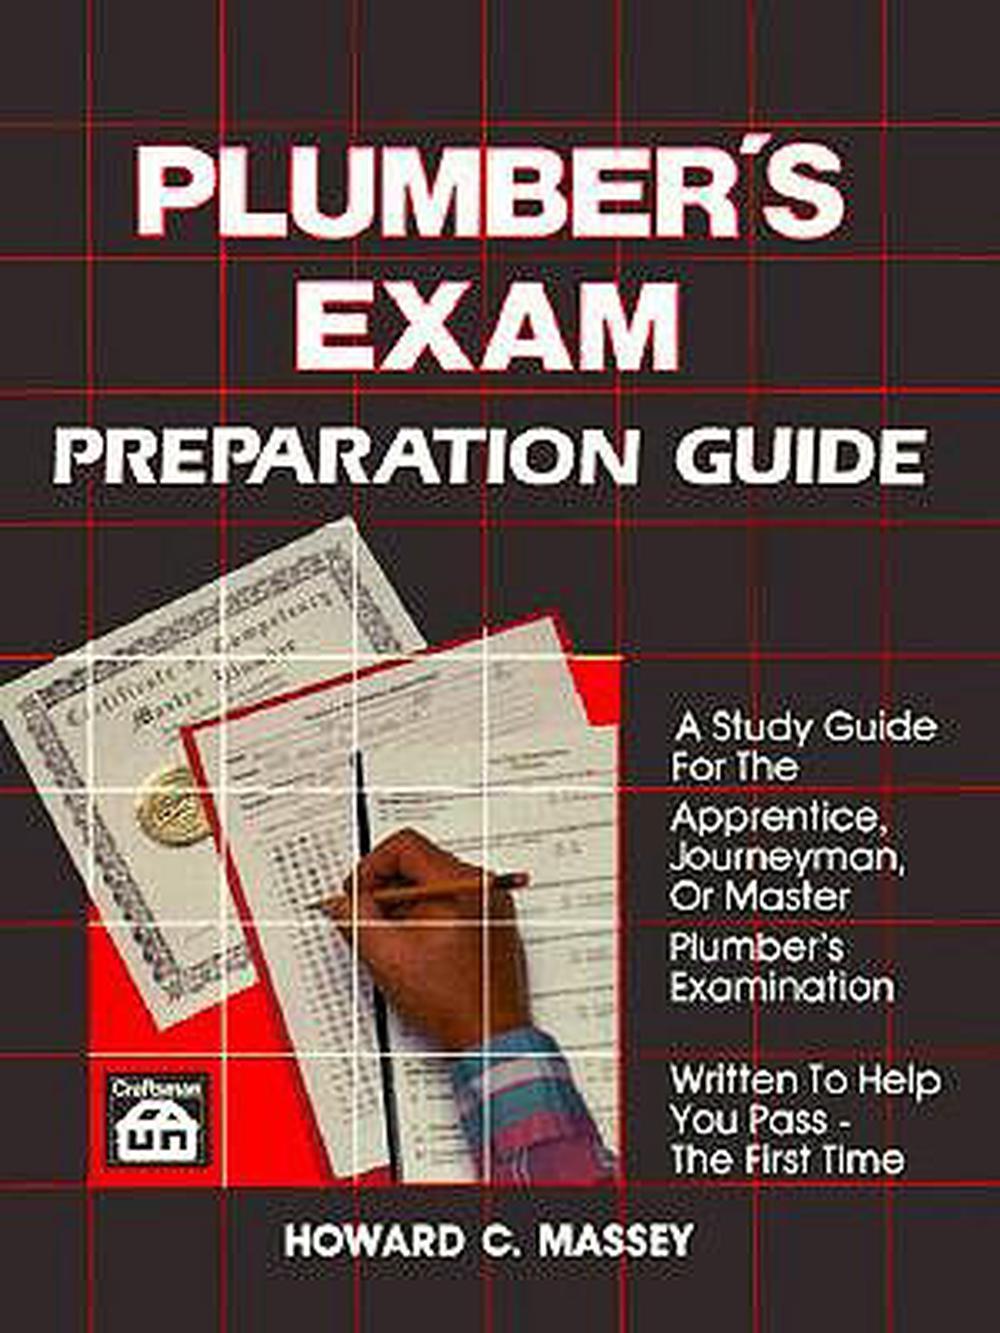 Maryland plumber installer license prep class for windows download